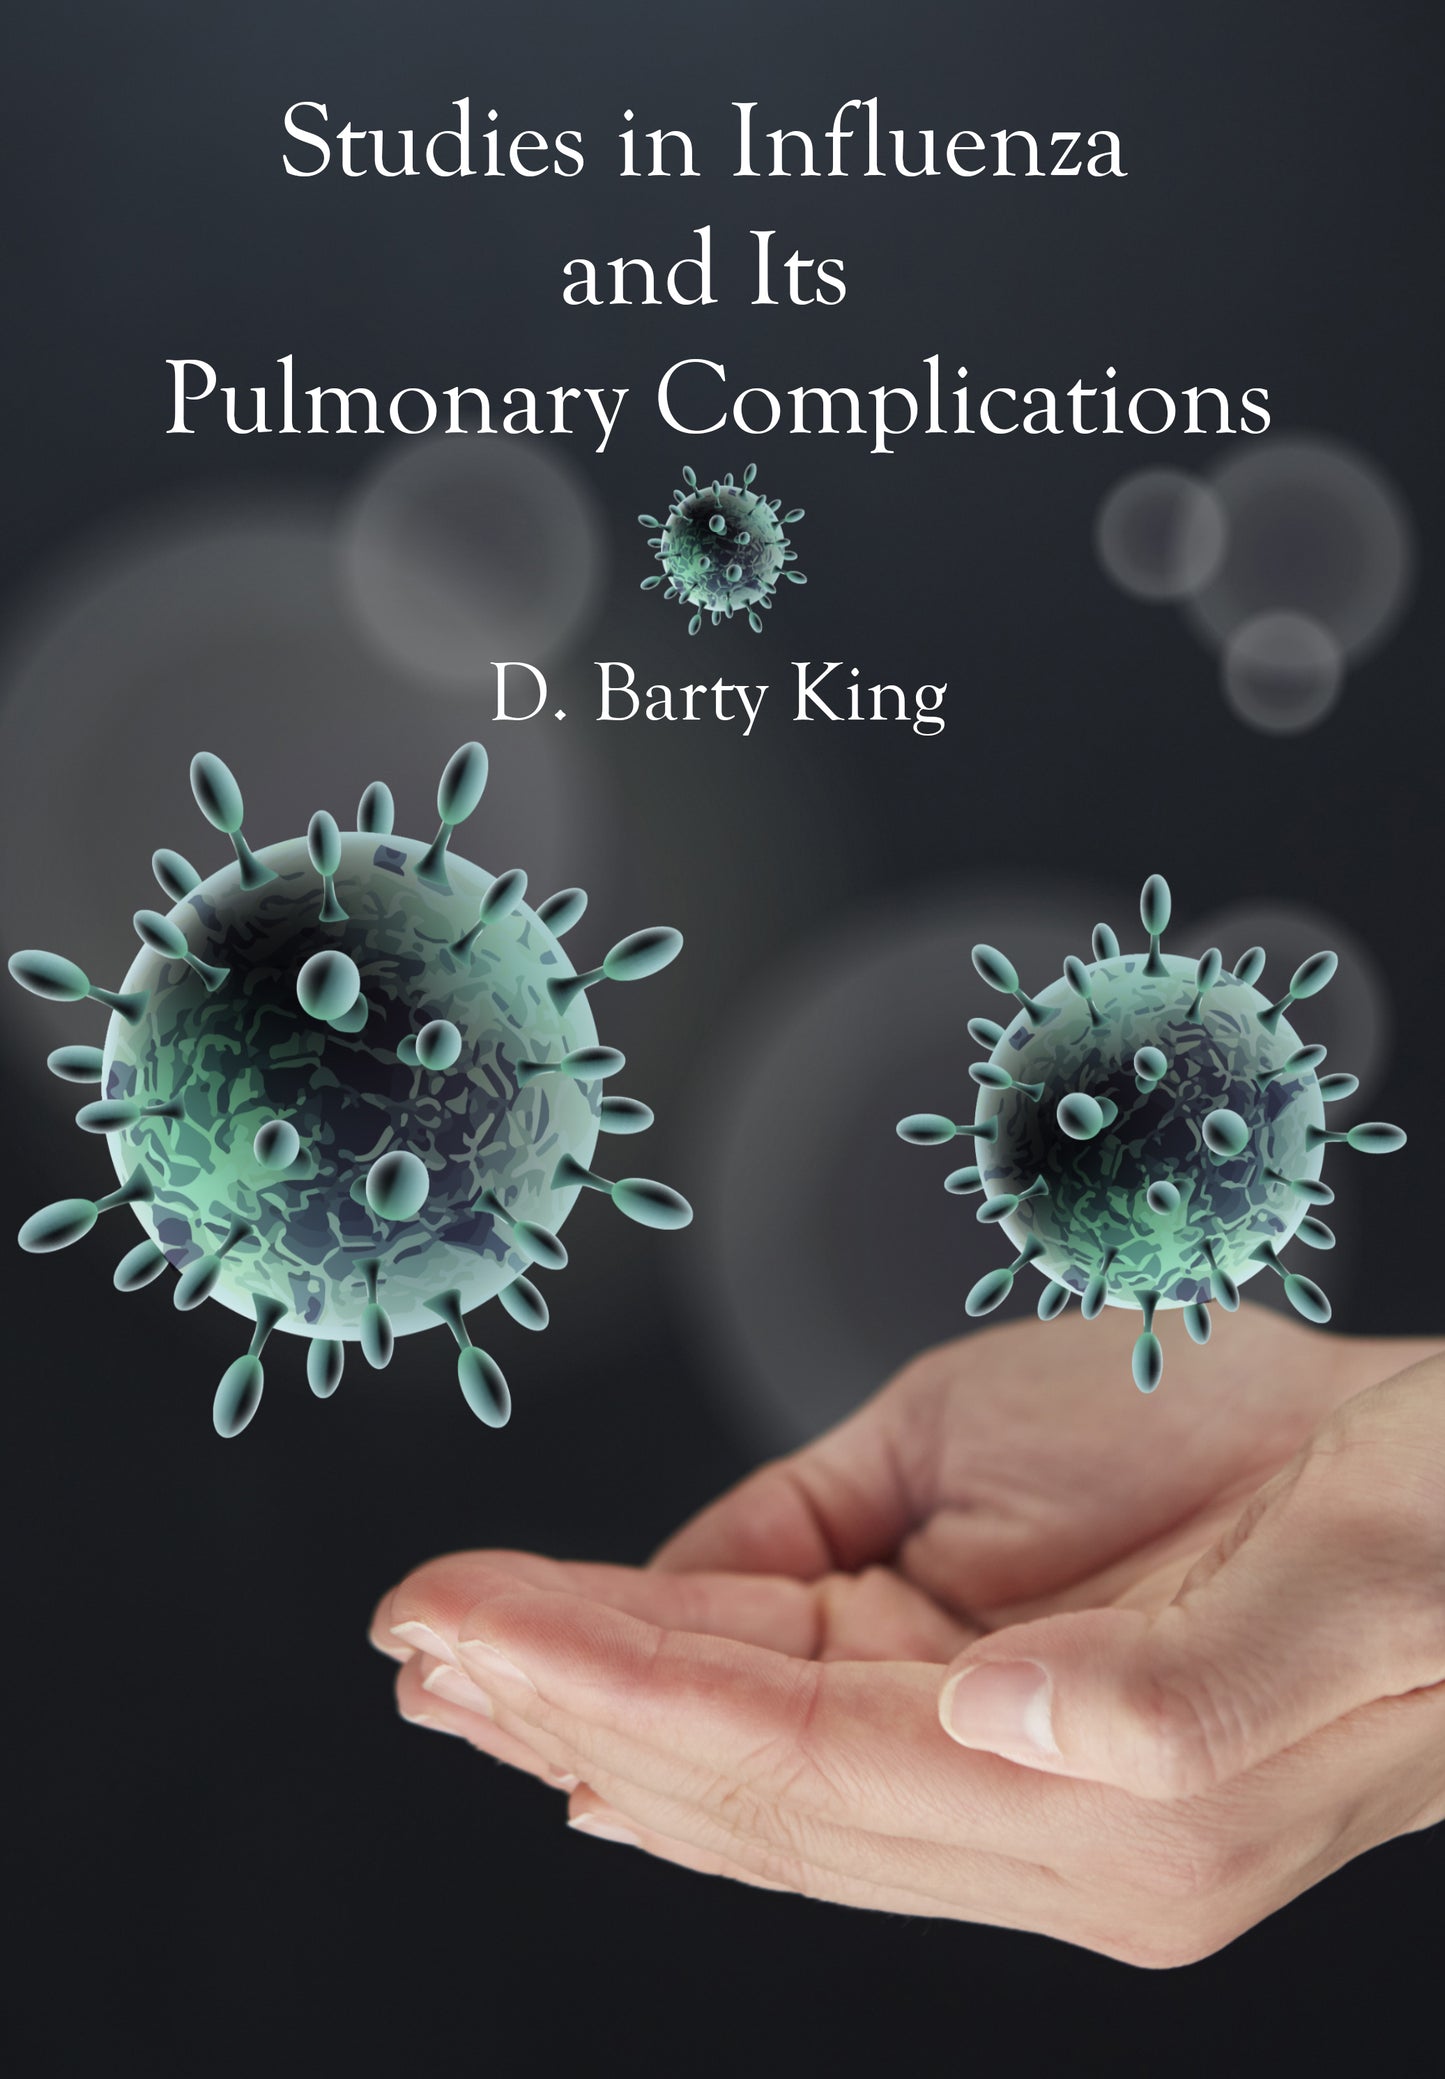 Studies in Influenza and Its Pulmonary Complications